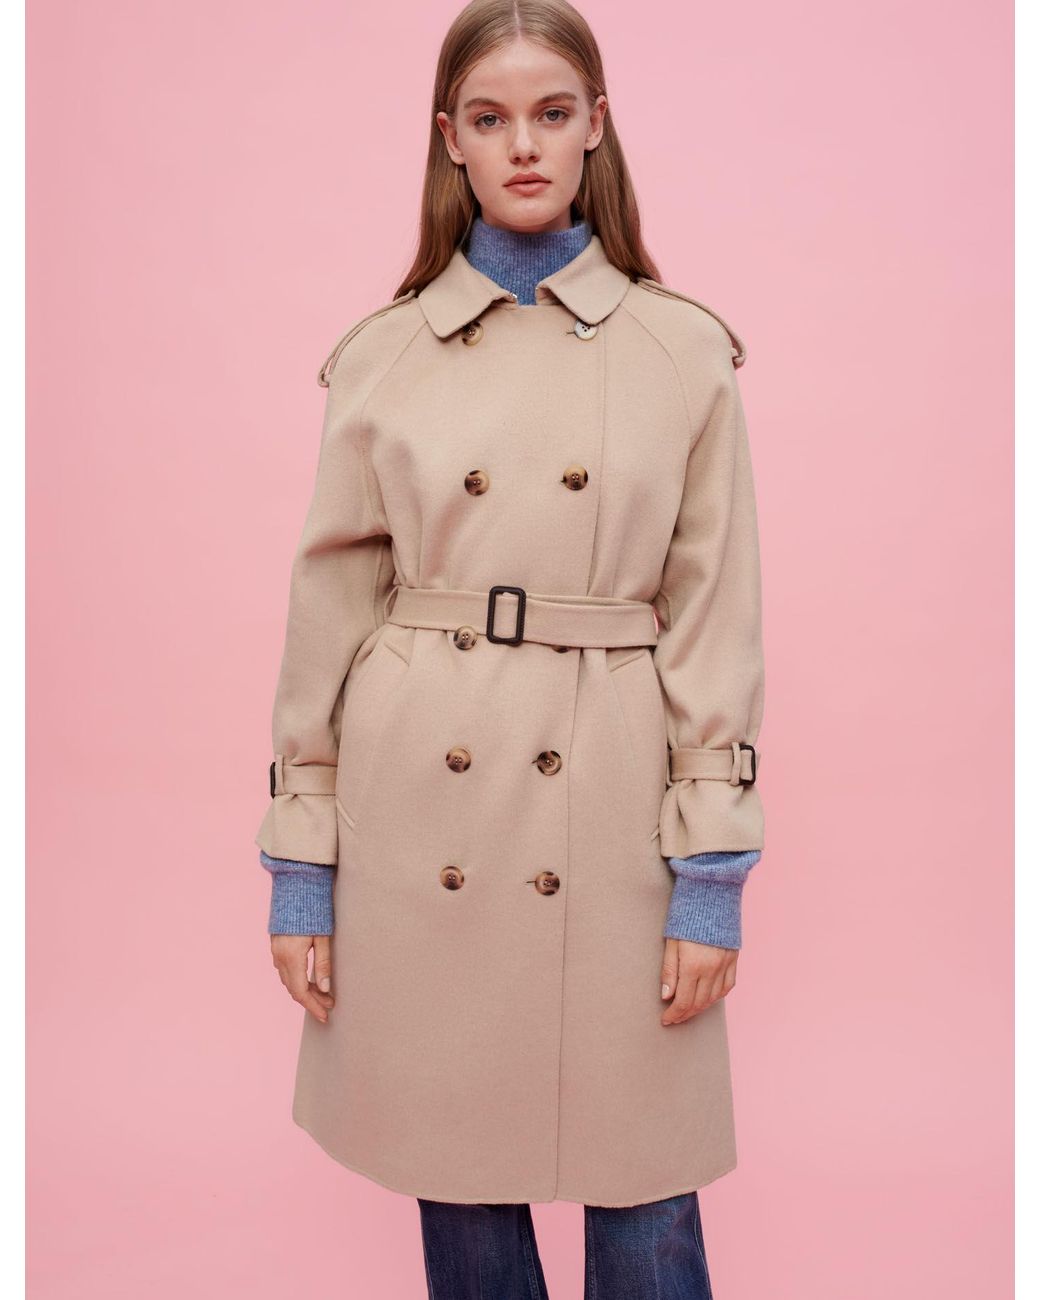 Maje Double-faced Trench Coat in Natural | Lyst